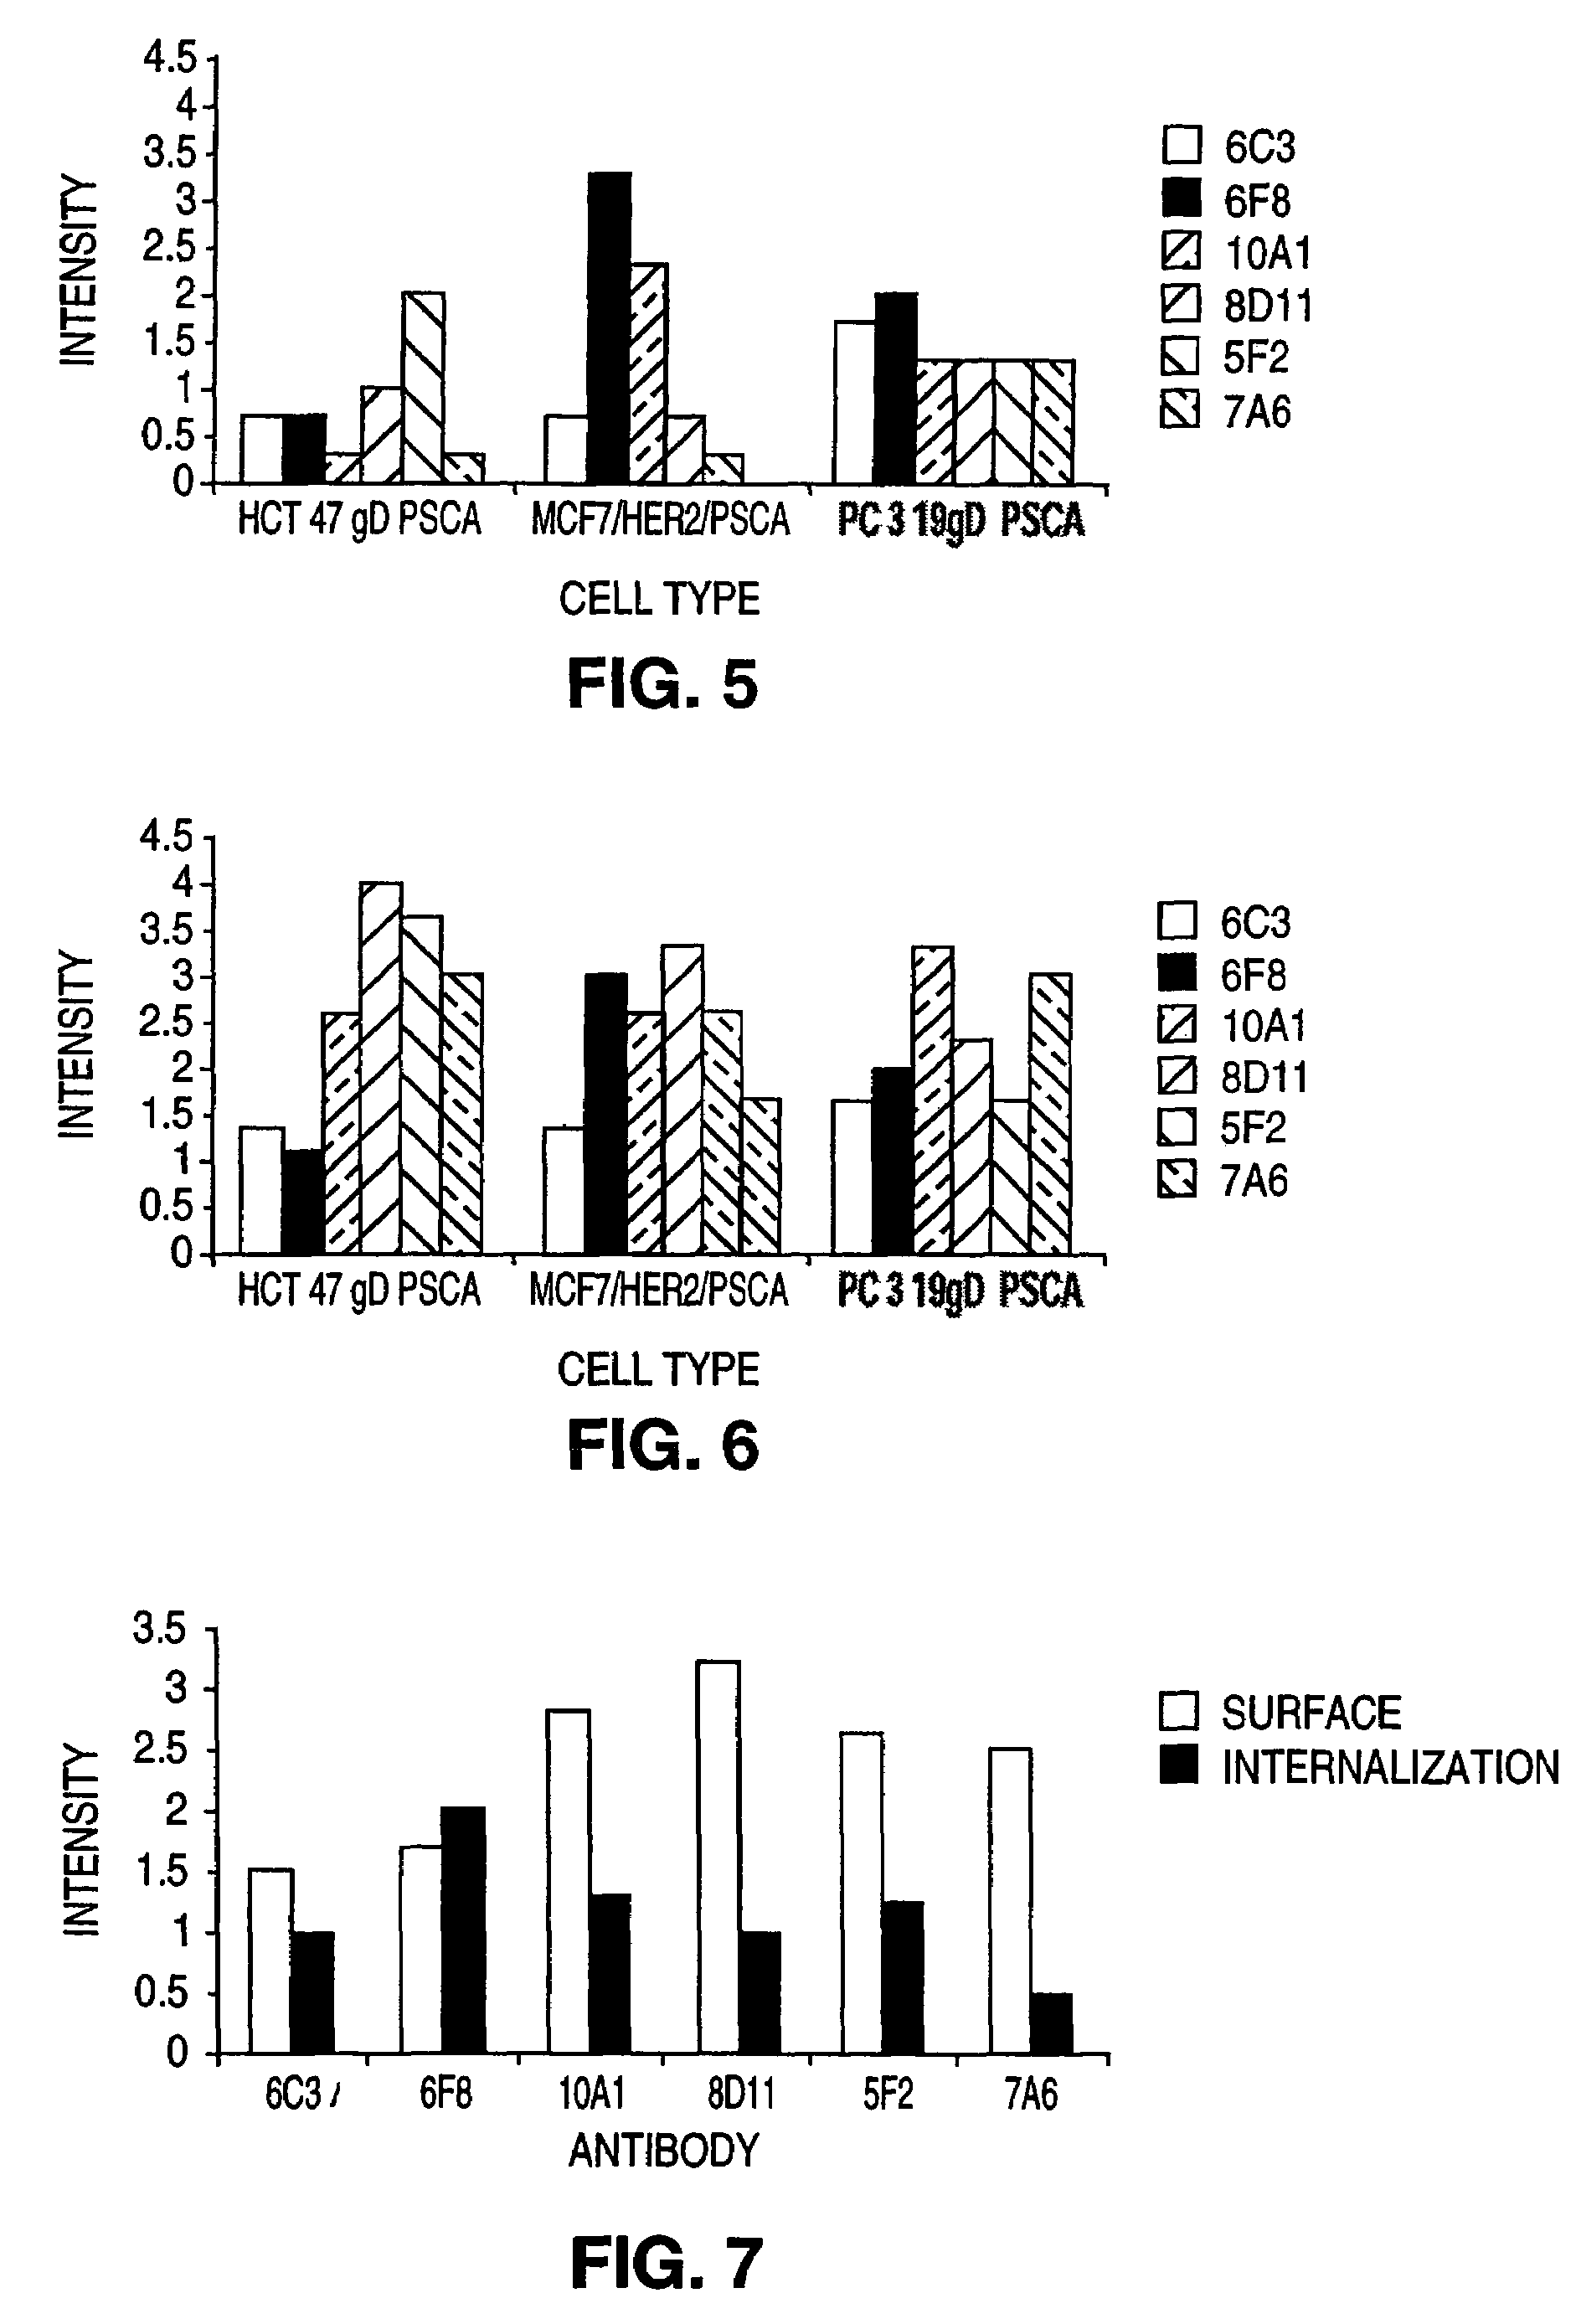 Anti-tumor antibody compositions and methods of use